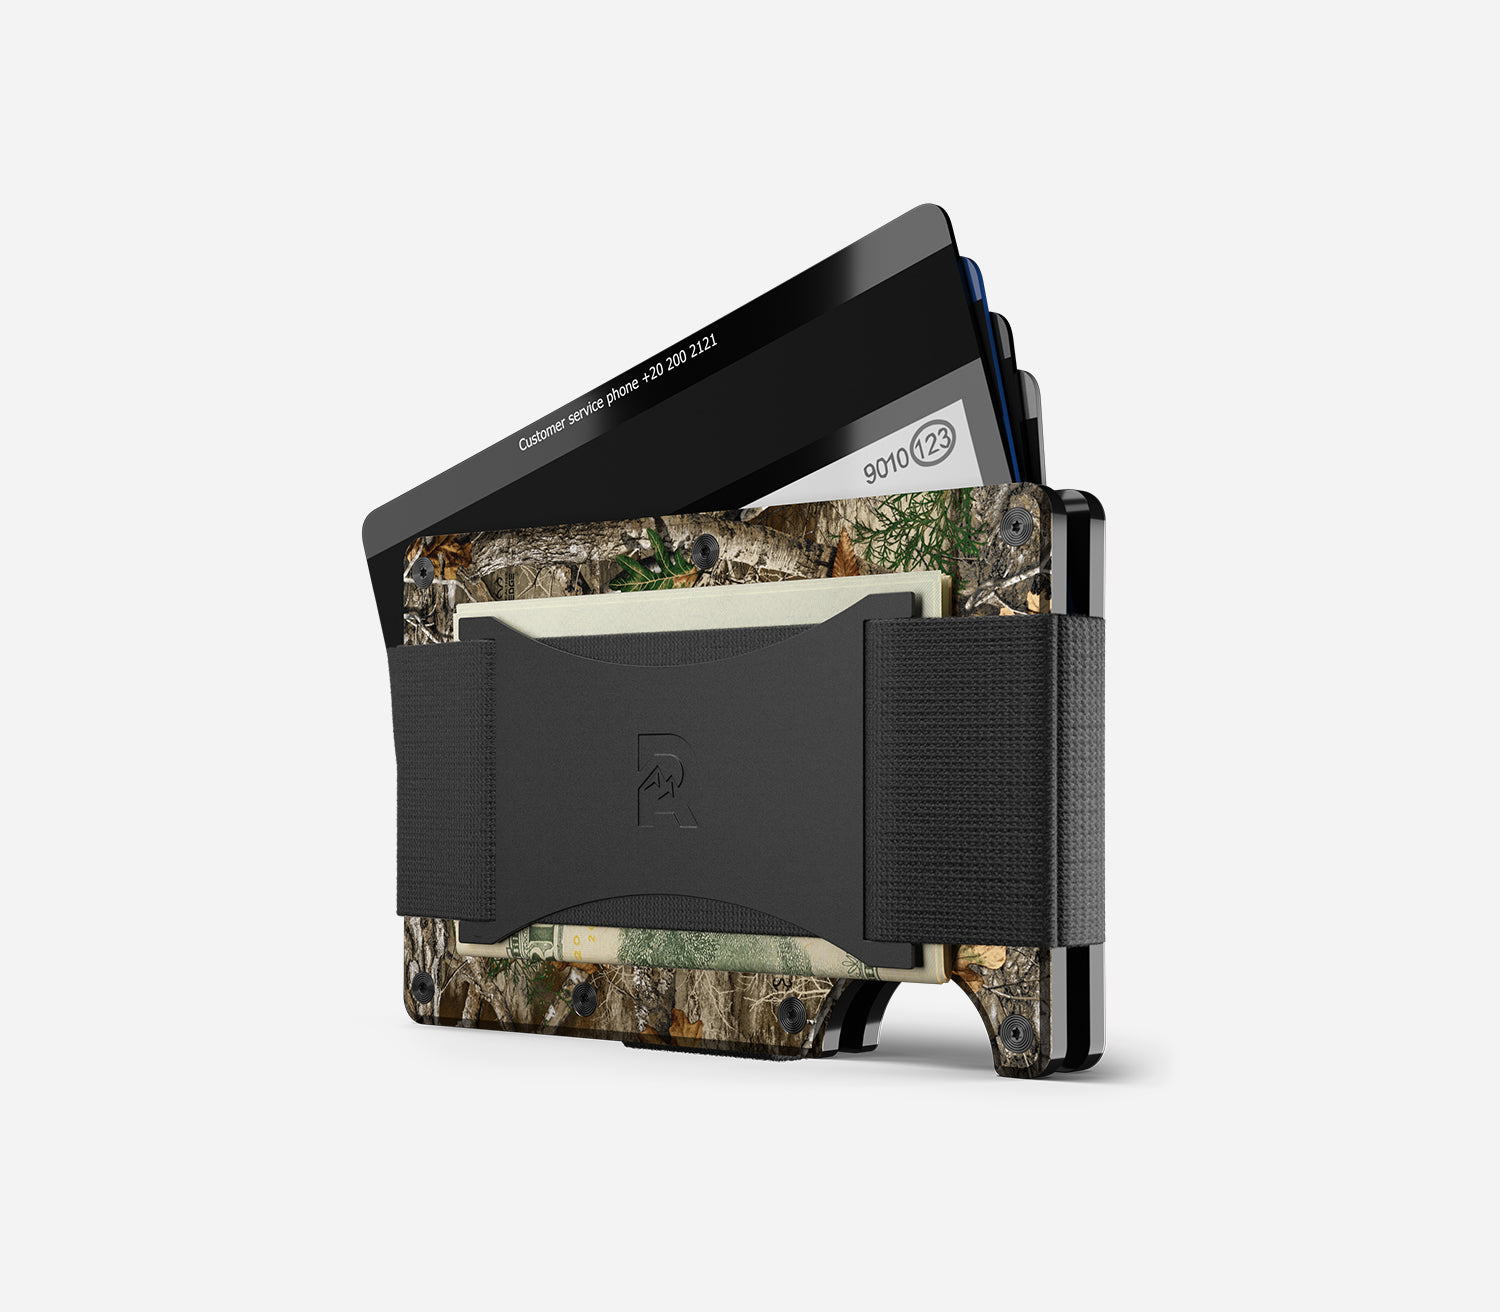 Realtree EDGE Camo Burnished Tan Leather Trifold Wallet